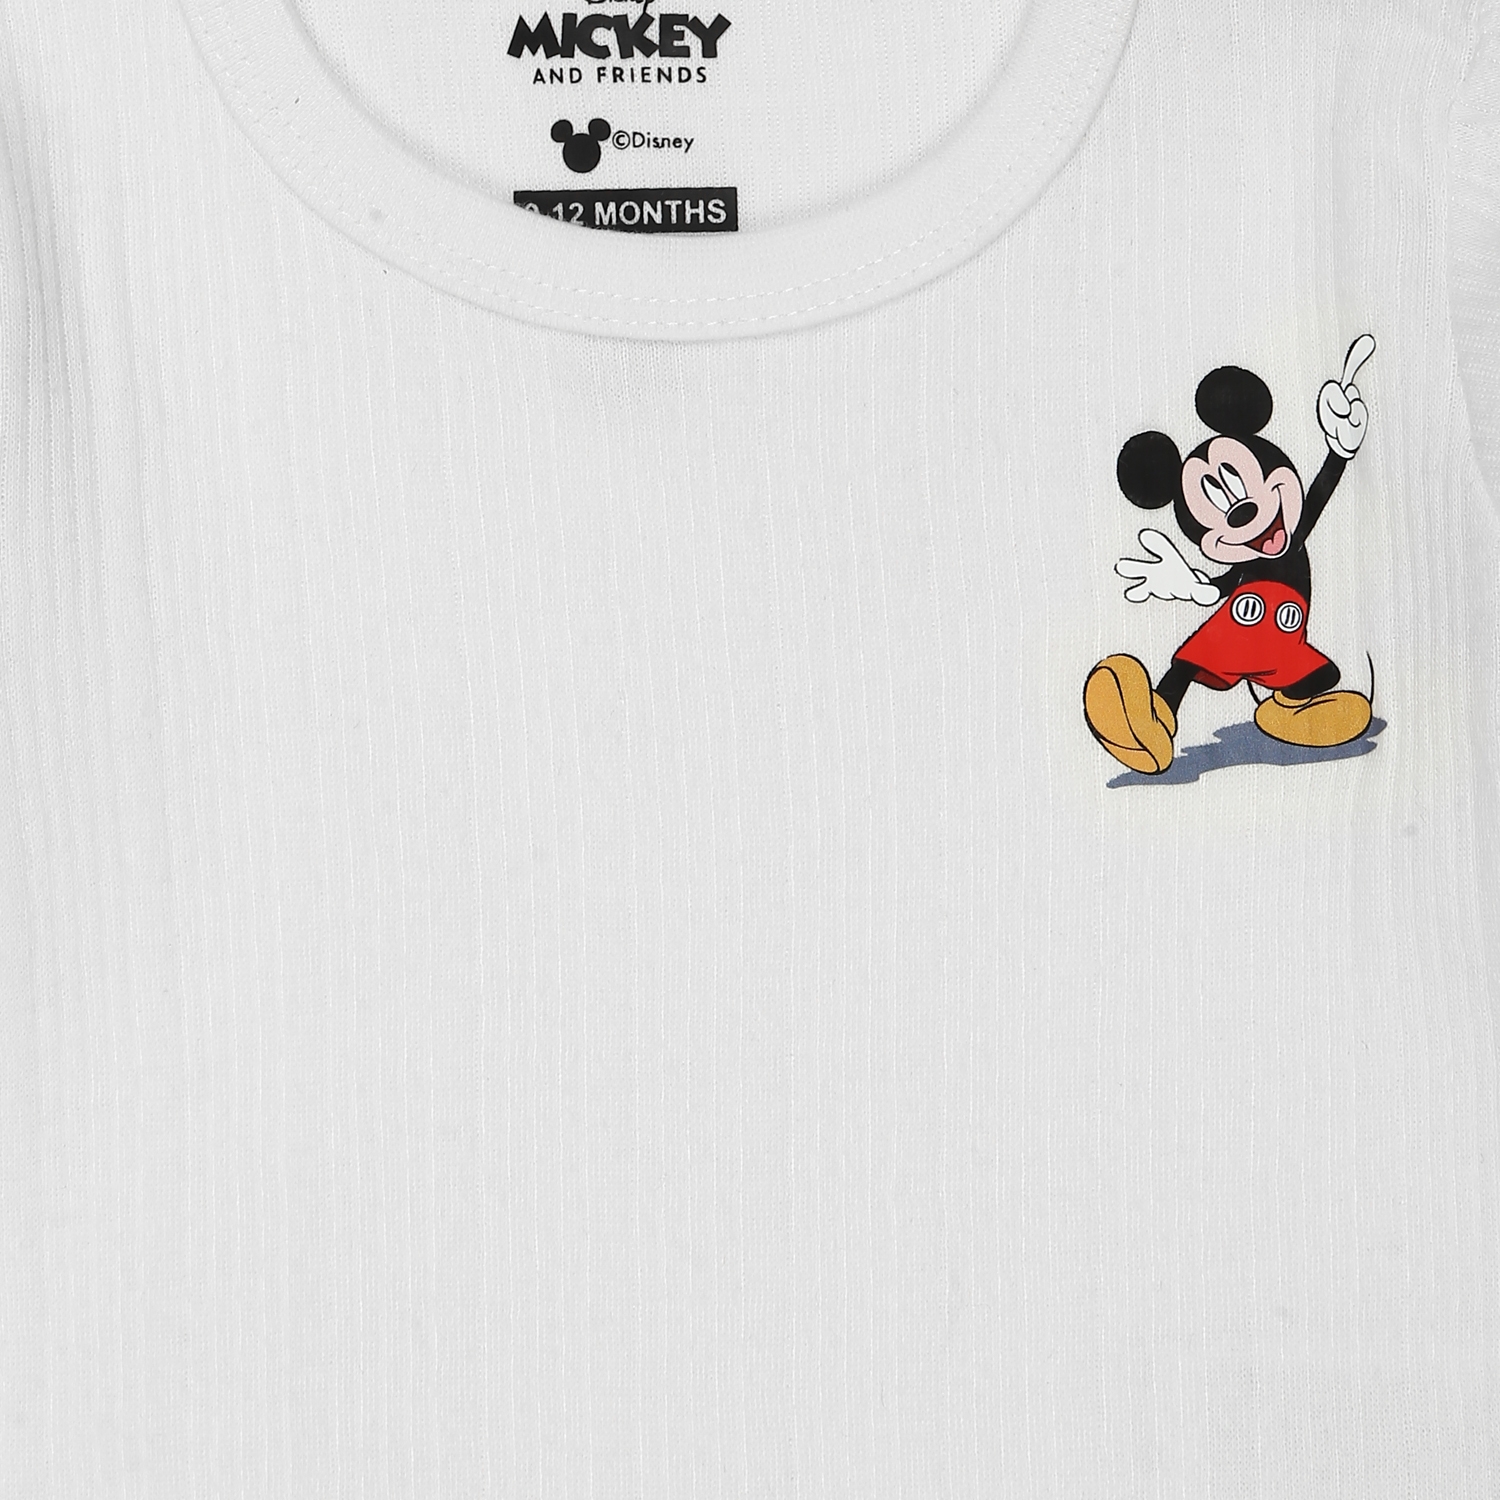 Boys Full Sleeves Mickey Mouse Thermal Vest-White